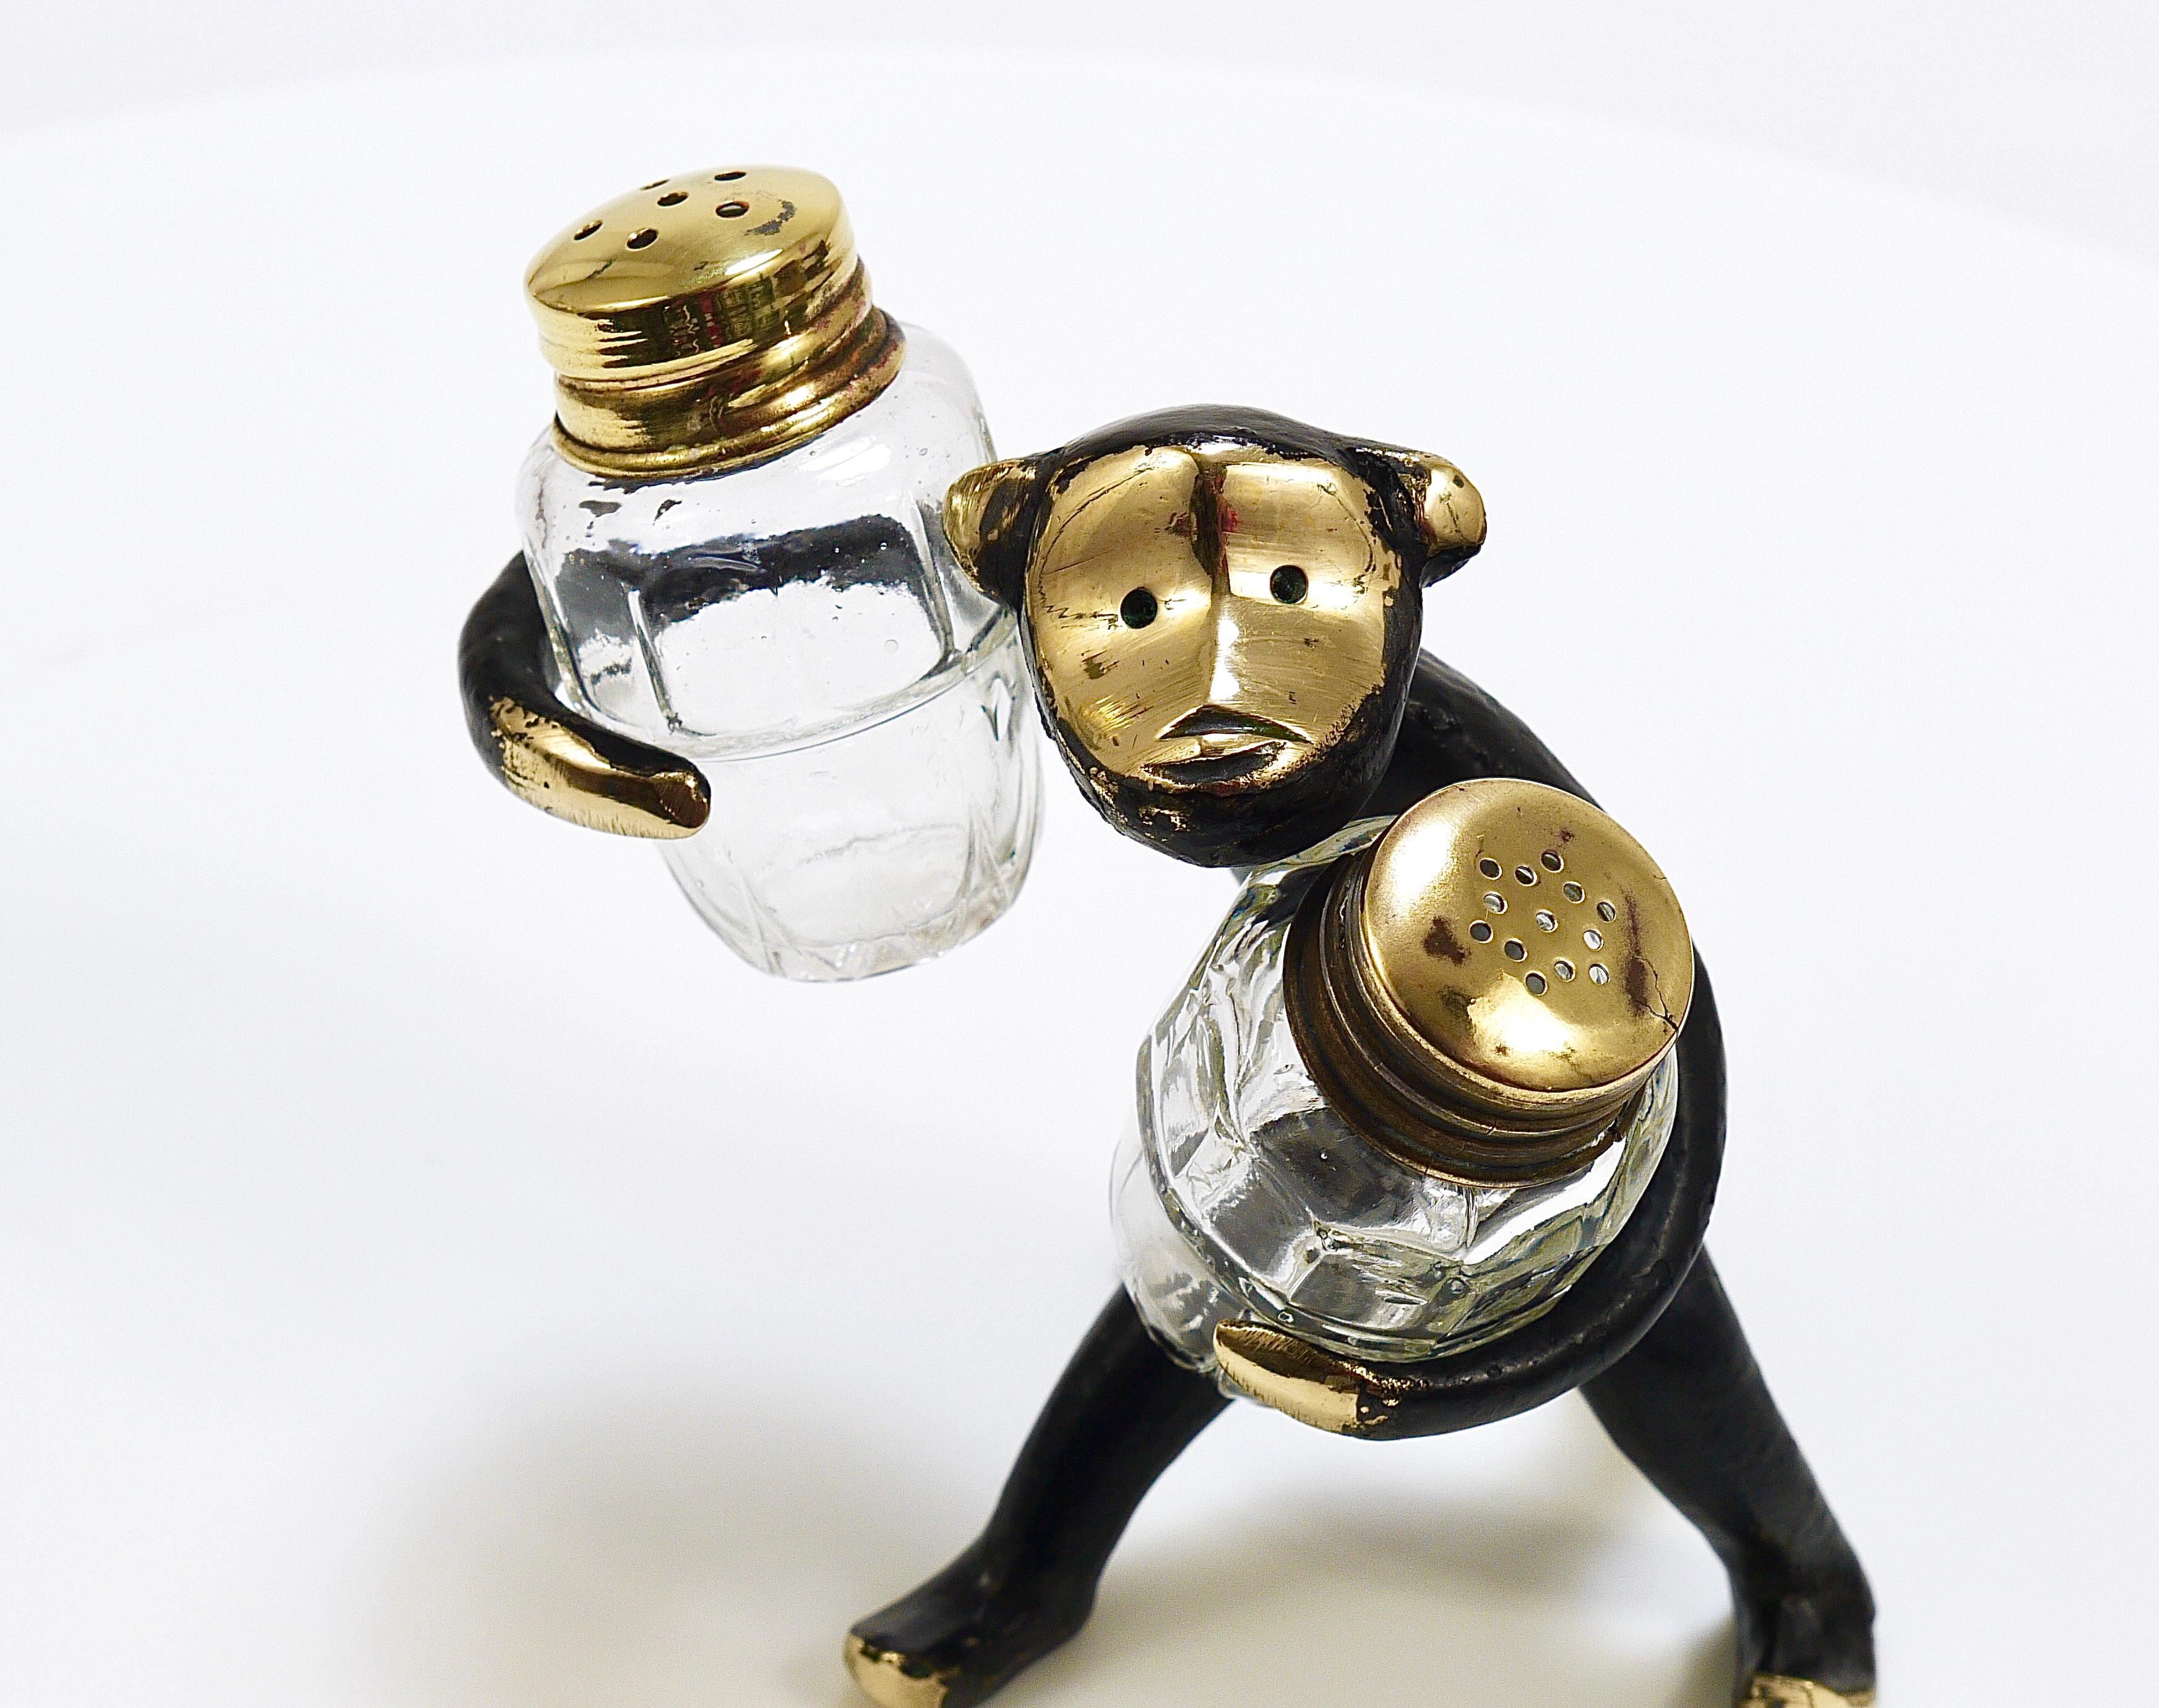 A charming Austrian midcentury shaker set from the 1950s, displaying a cute monkey holding salt and pepper shakers. A humorous design by Walter Bosse, manufactured by Hertha Baller in Vienna, Austria. Made of blackened brass, in good condition with